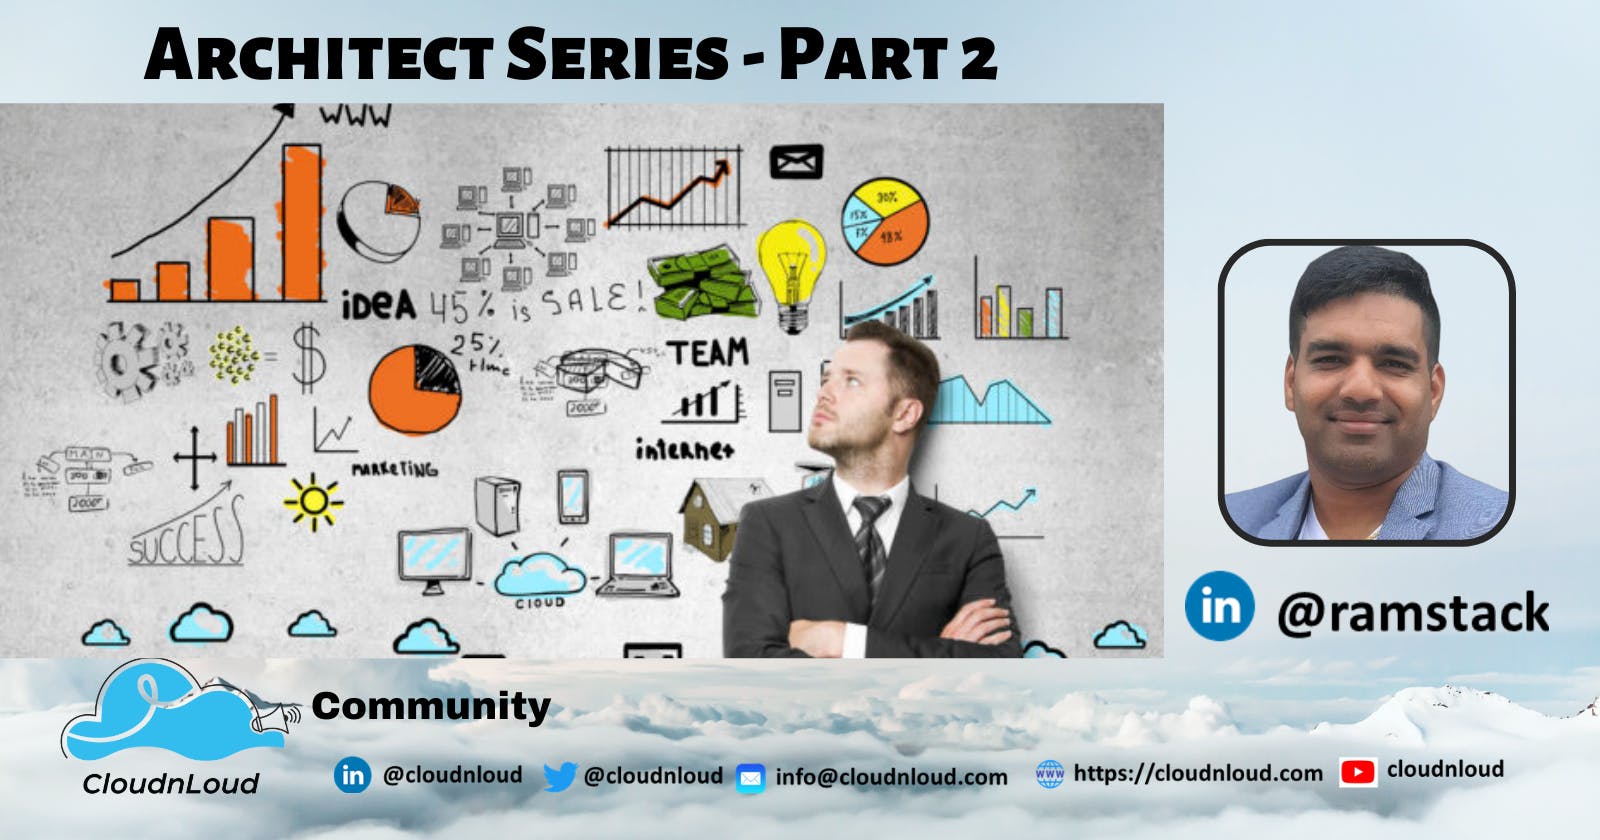 Architect Series#2 

Journey from Sysadmin to Solution Architect